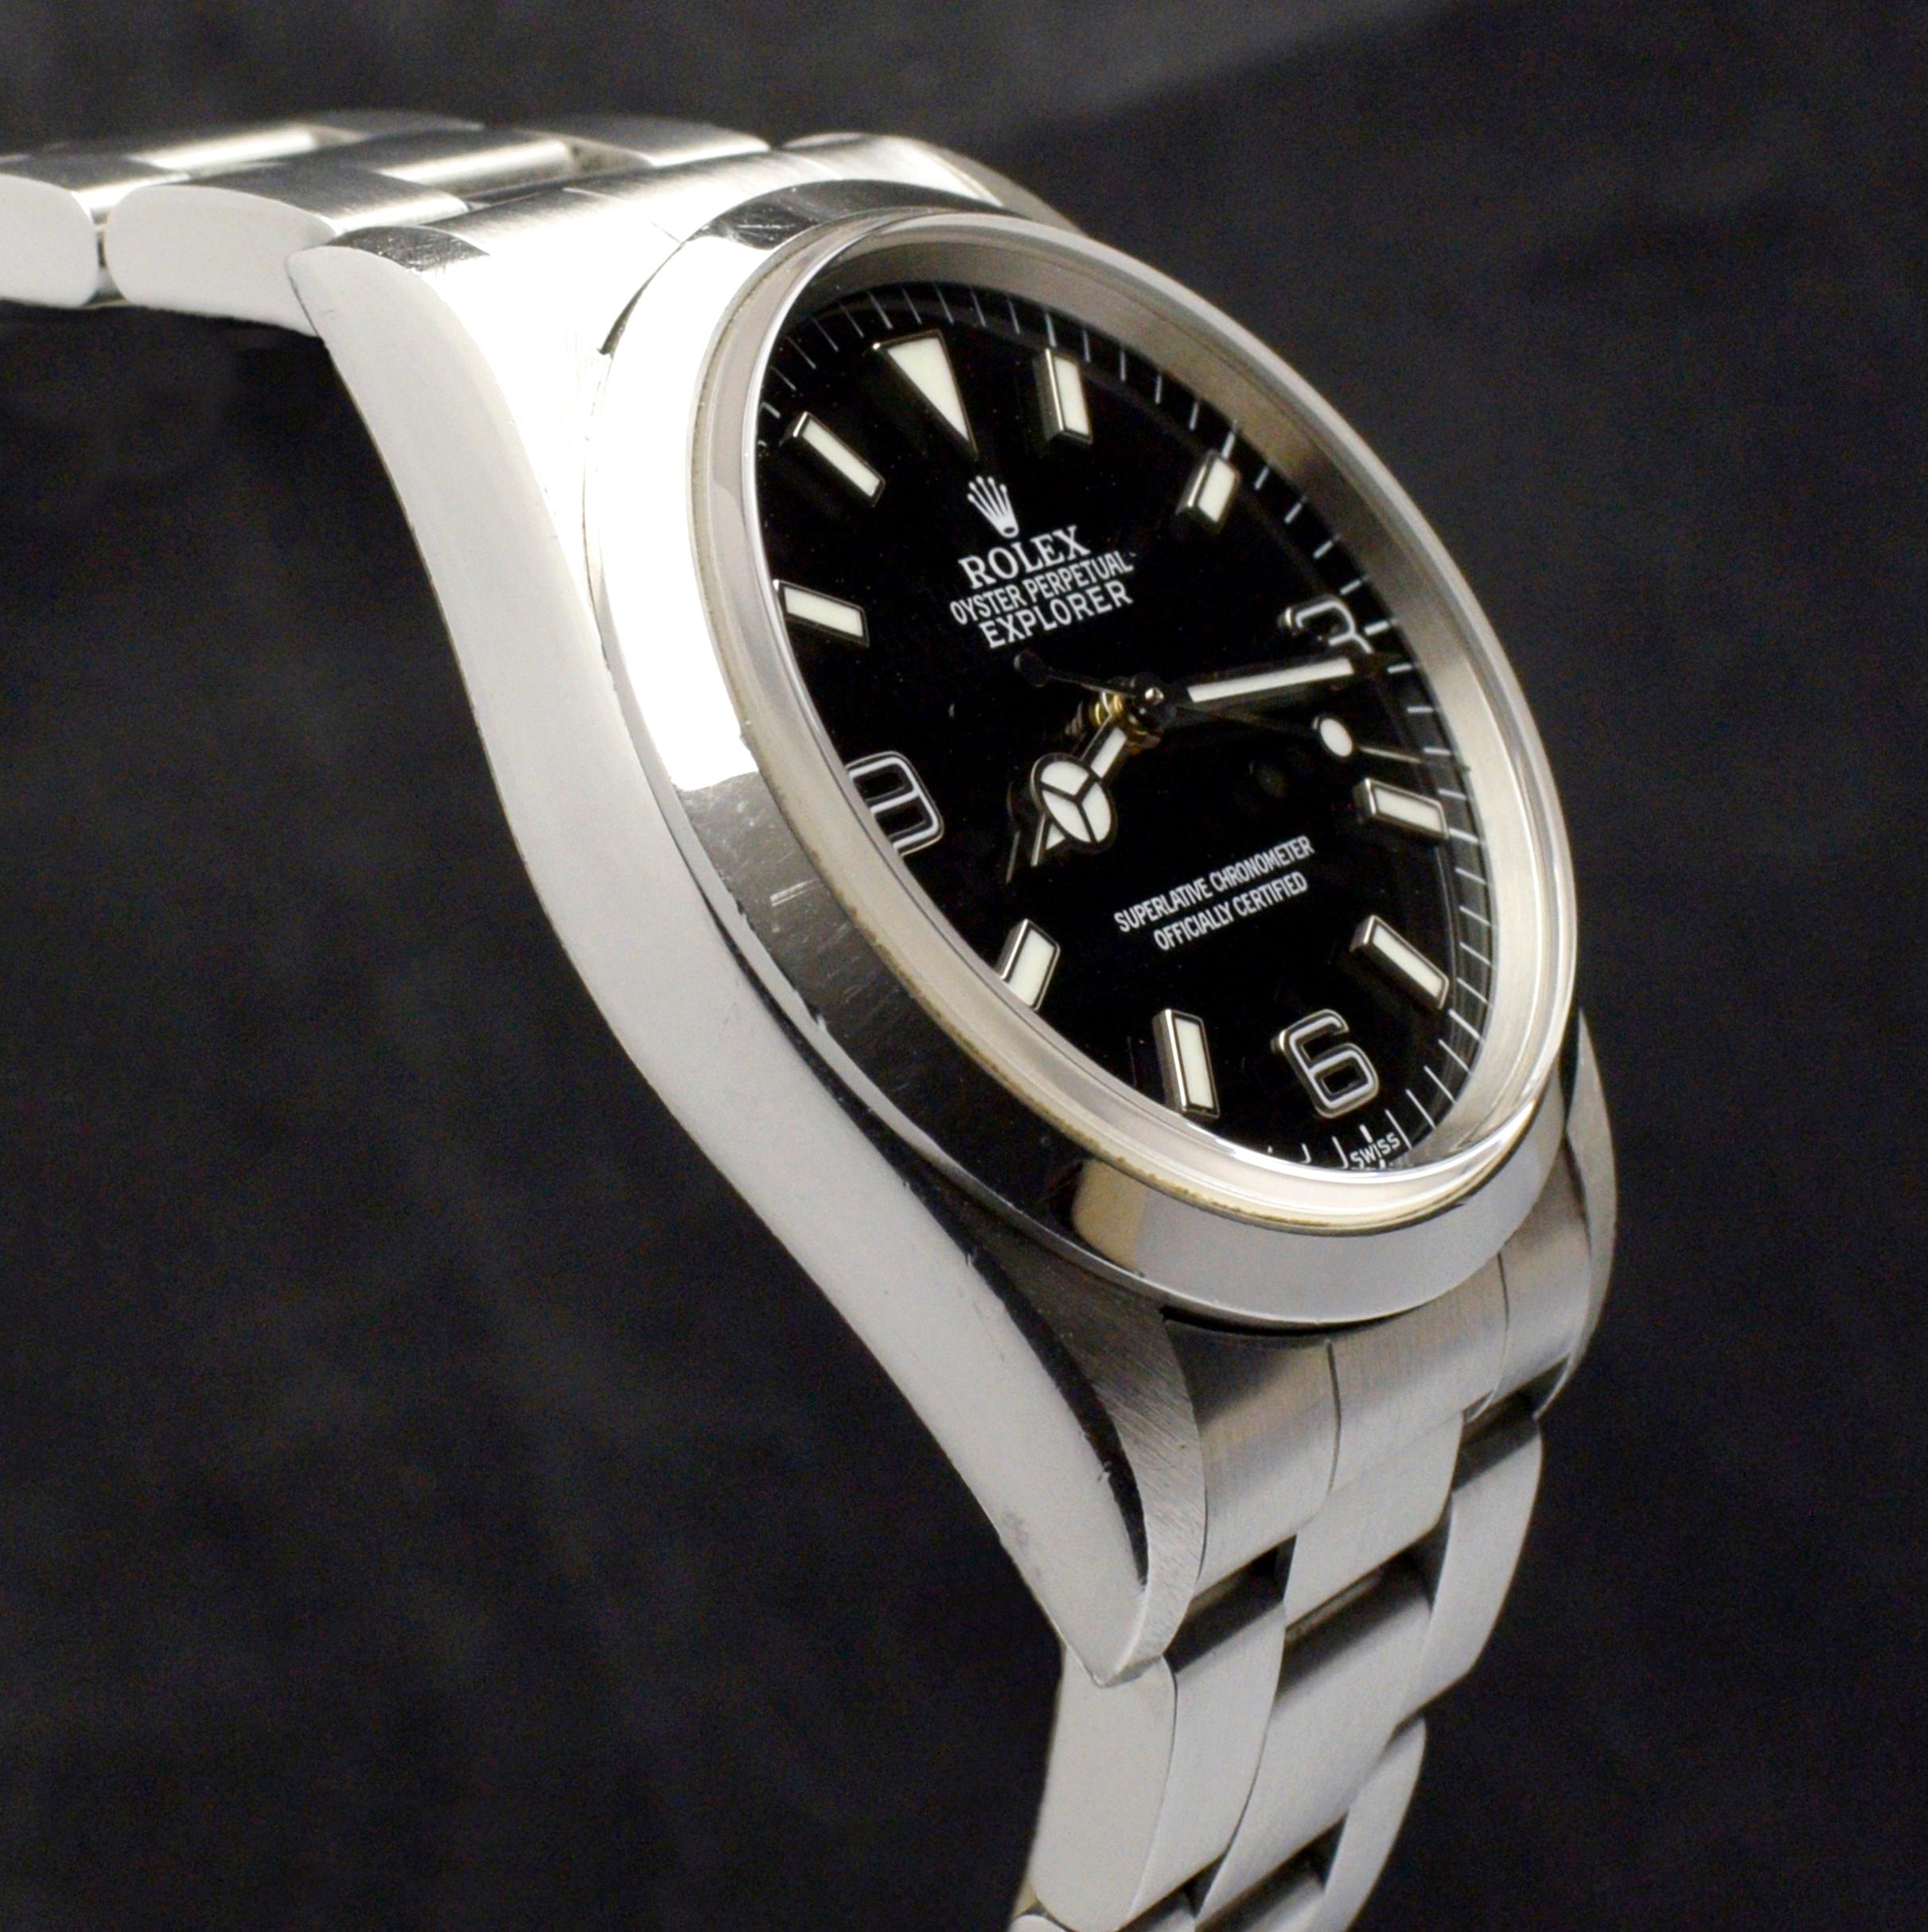 Rolex Explorer I Steel 14270 “Swiss” Only Automatic Watch with Paper, 1998 For Sale 1